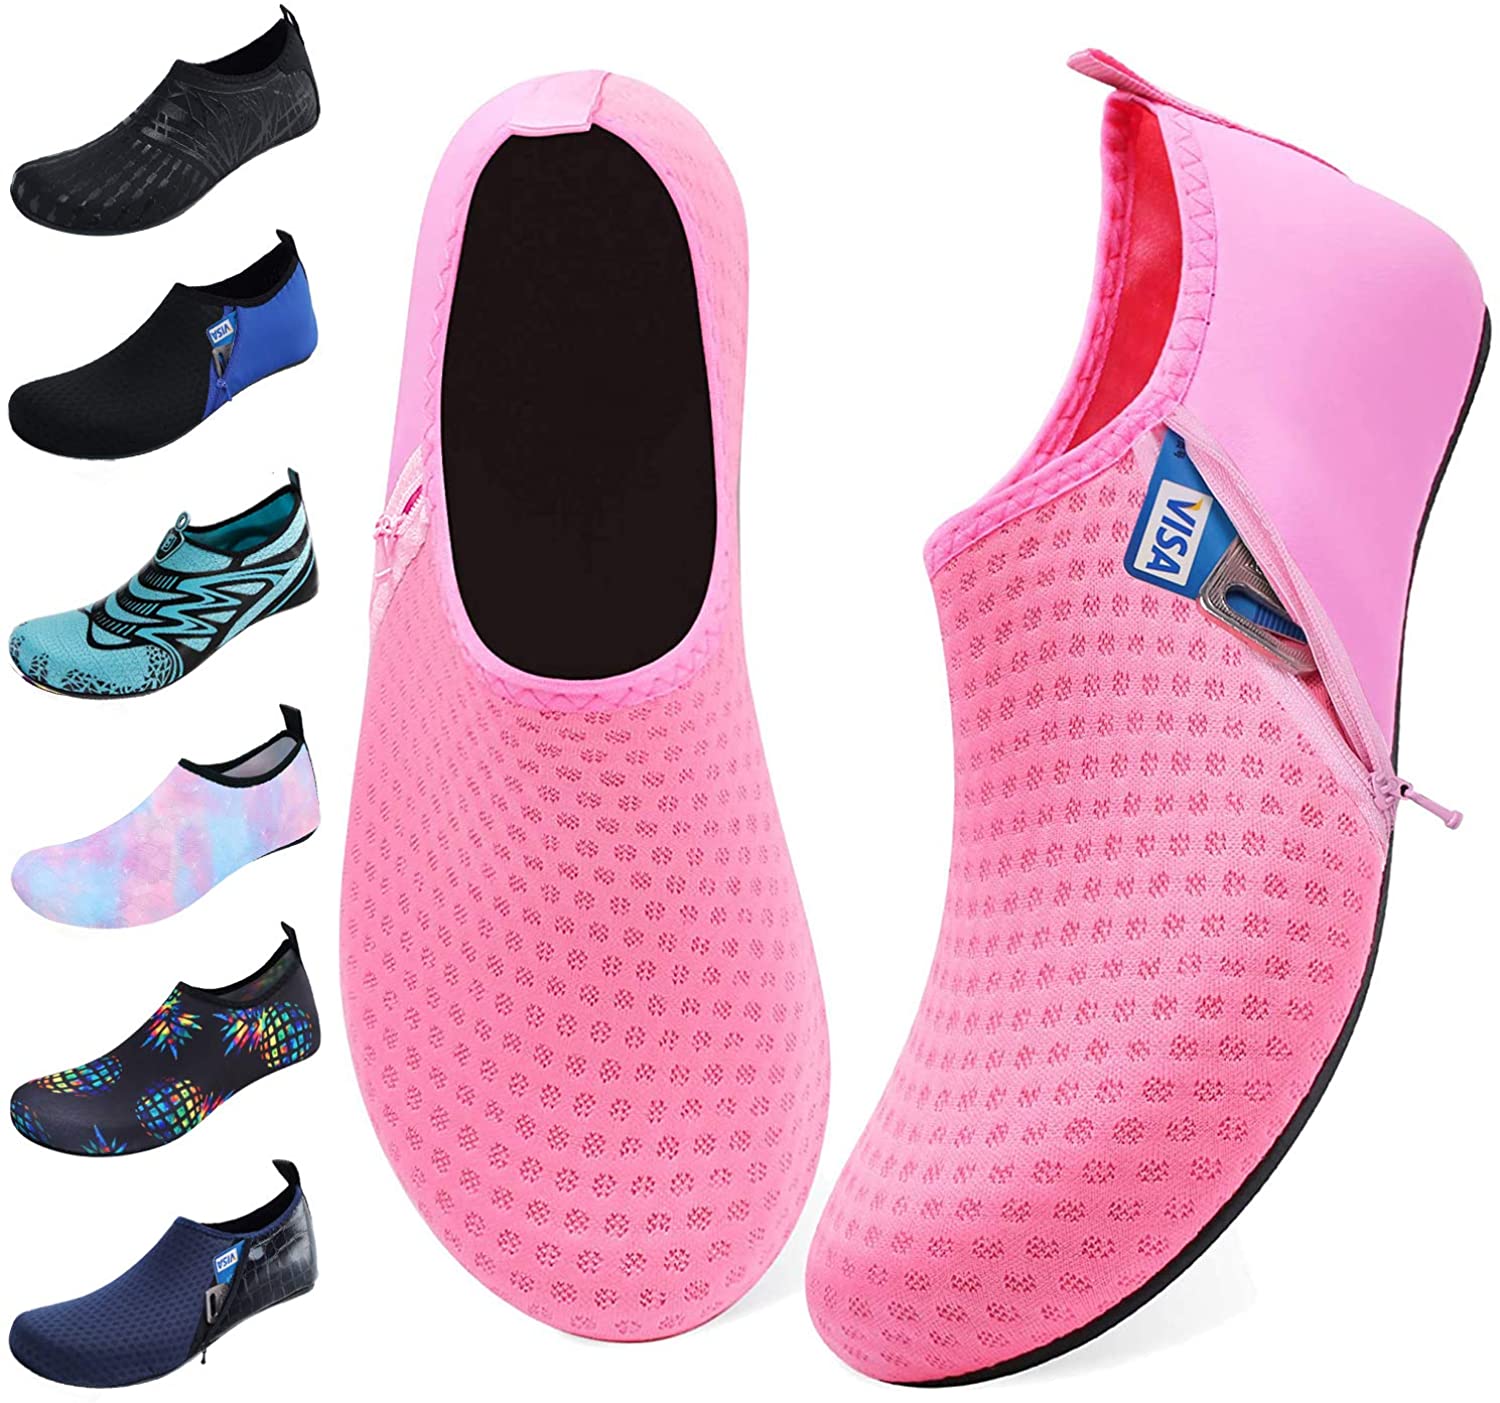 Get your own style now JOINFREE Unisex Water Shoes Barefoot Aqua Socks ...